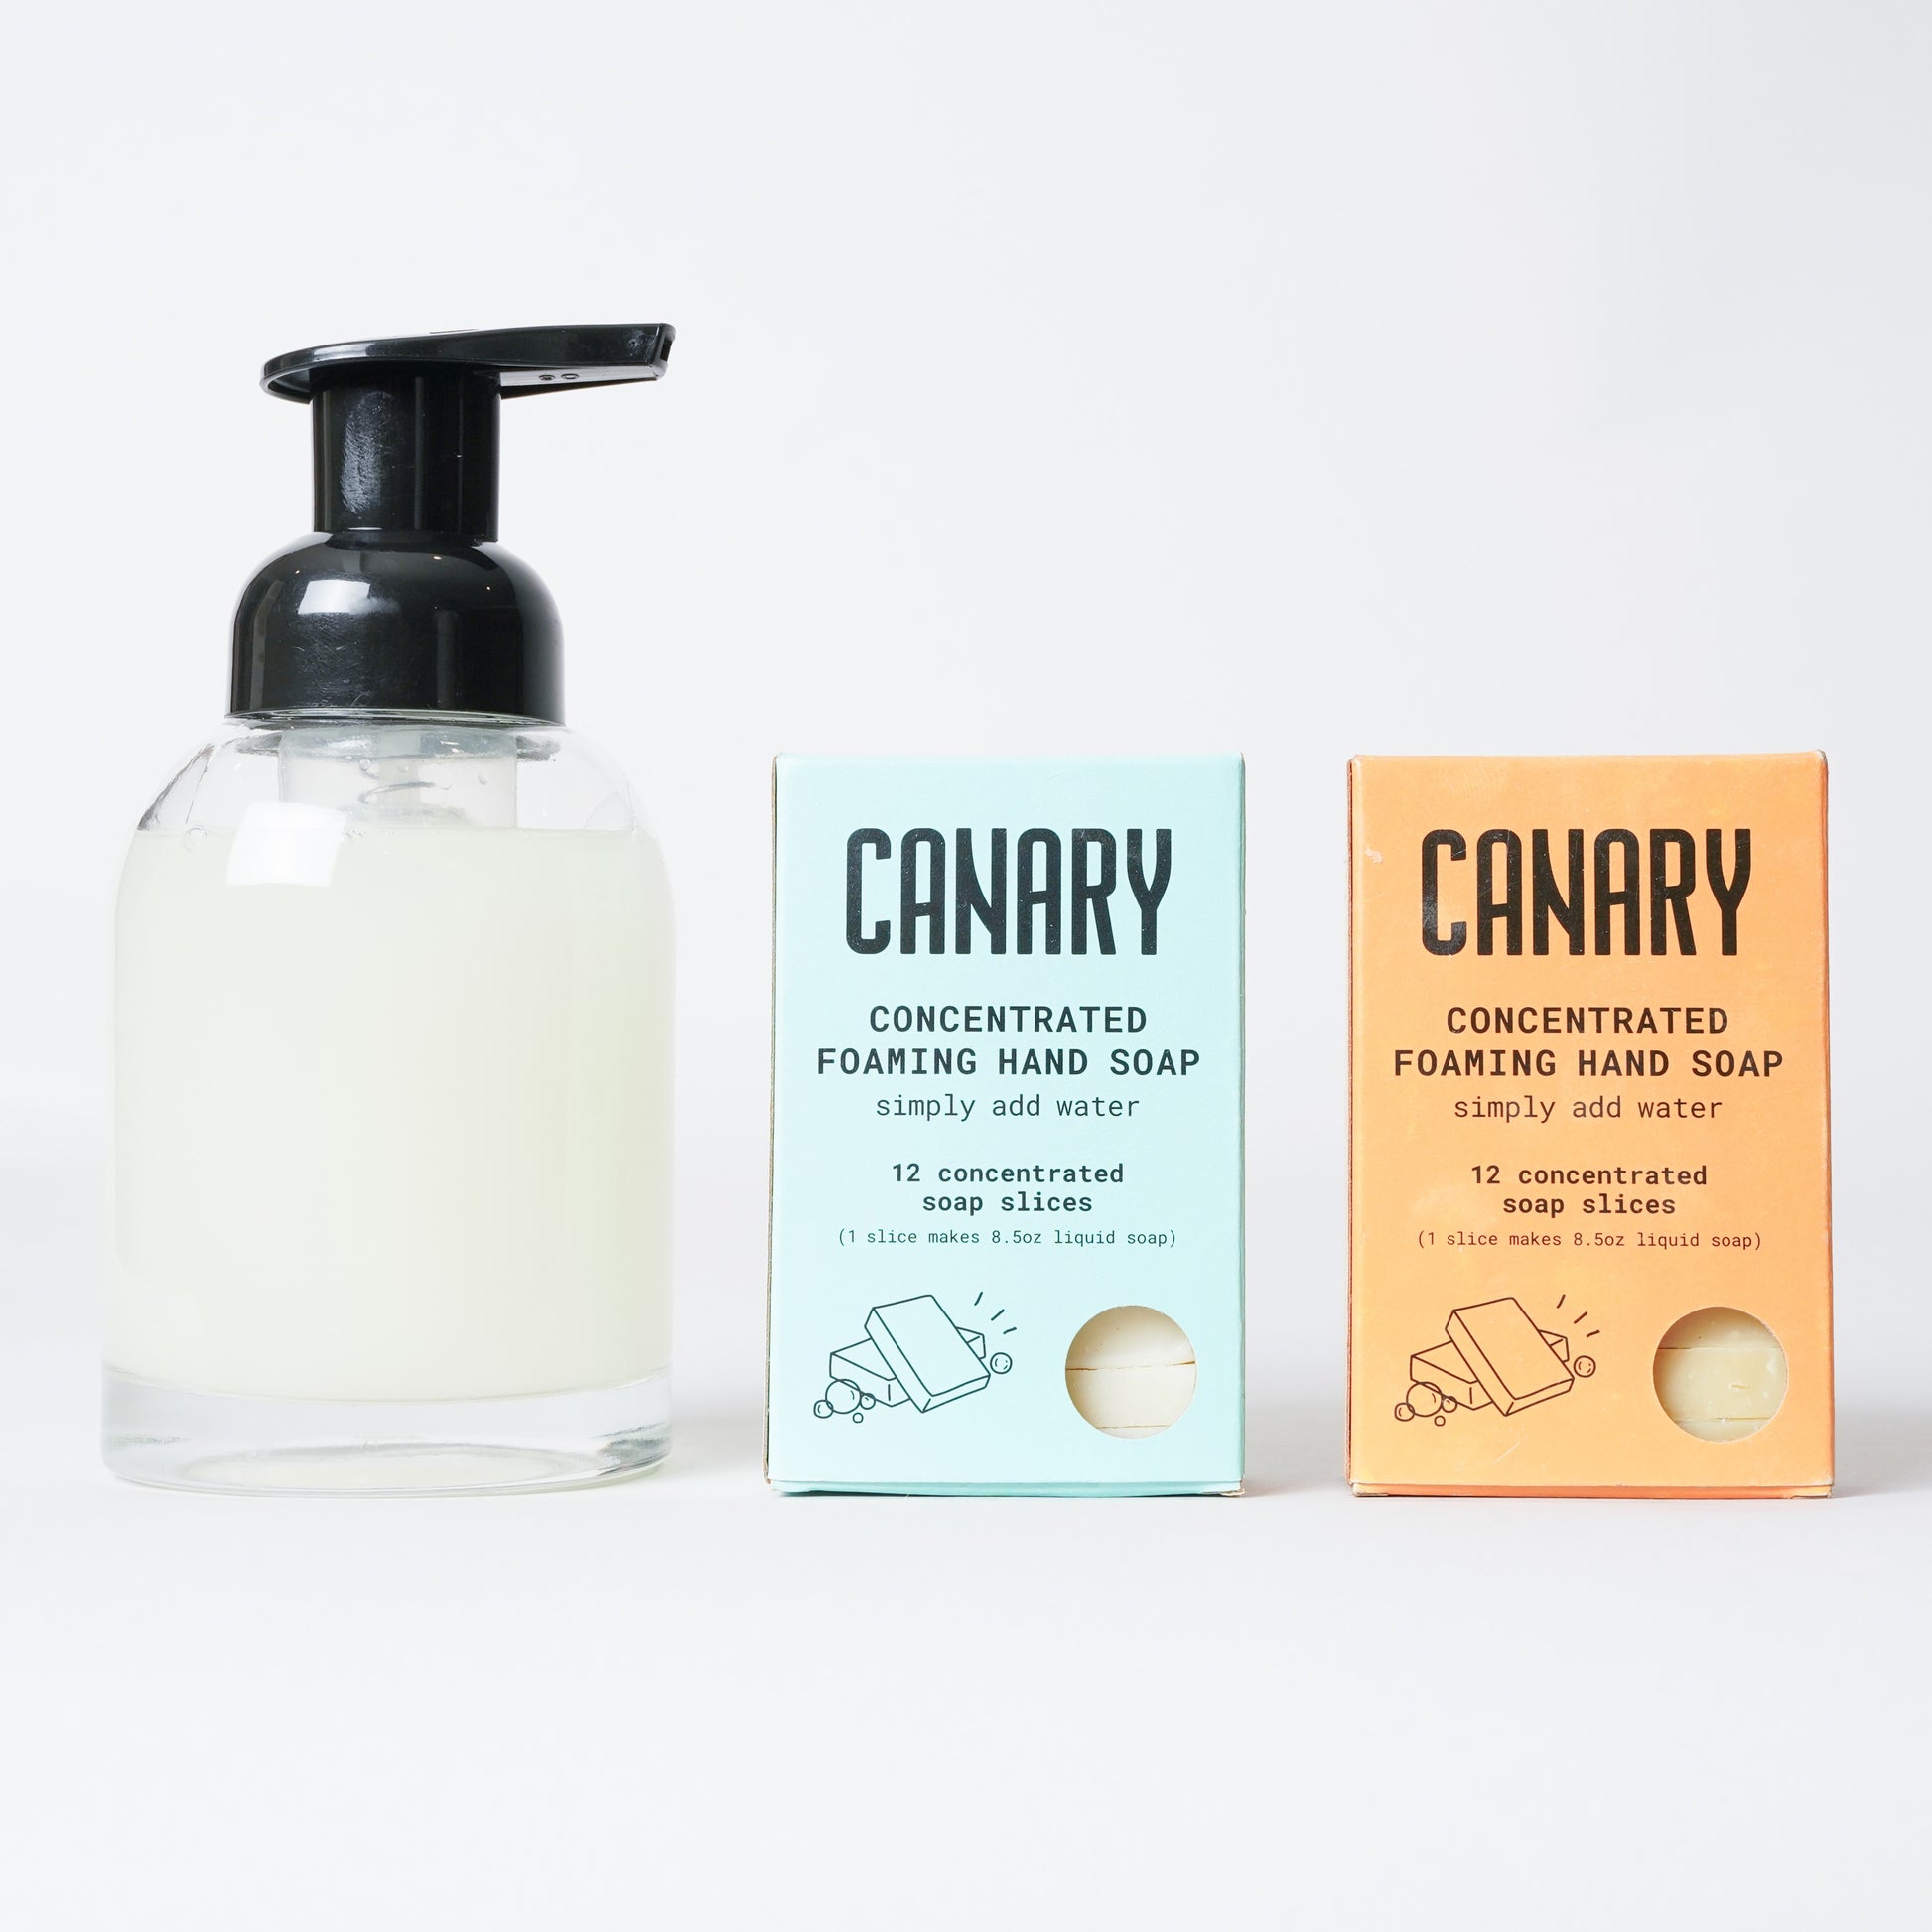 Both scents of Canary Concentrated Foaming Hand Soaps, and a bottle of the soap in use